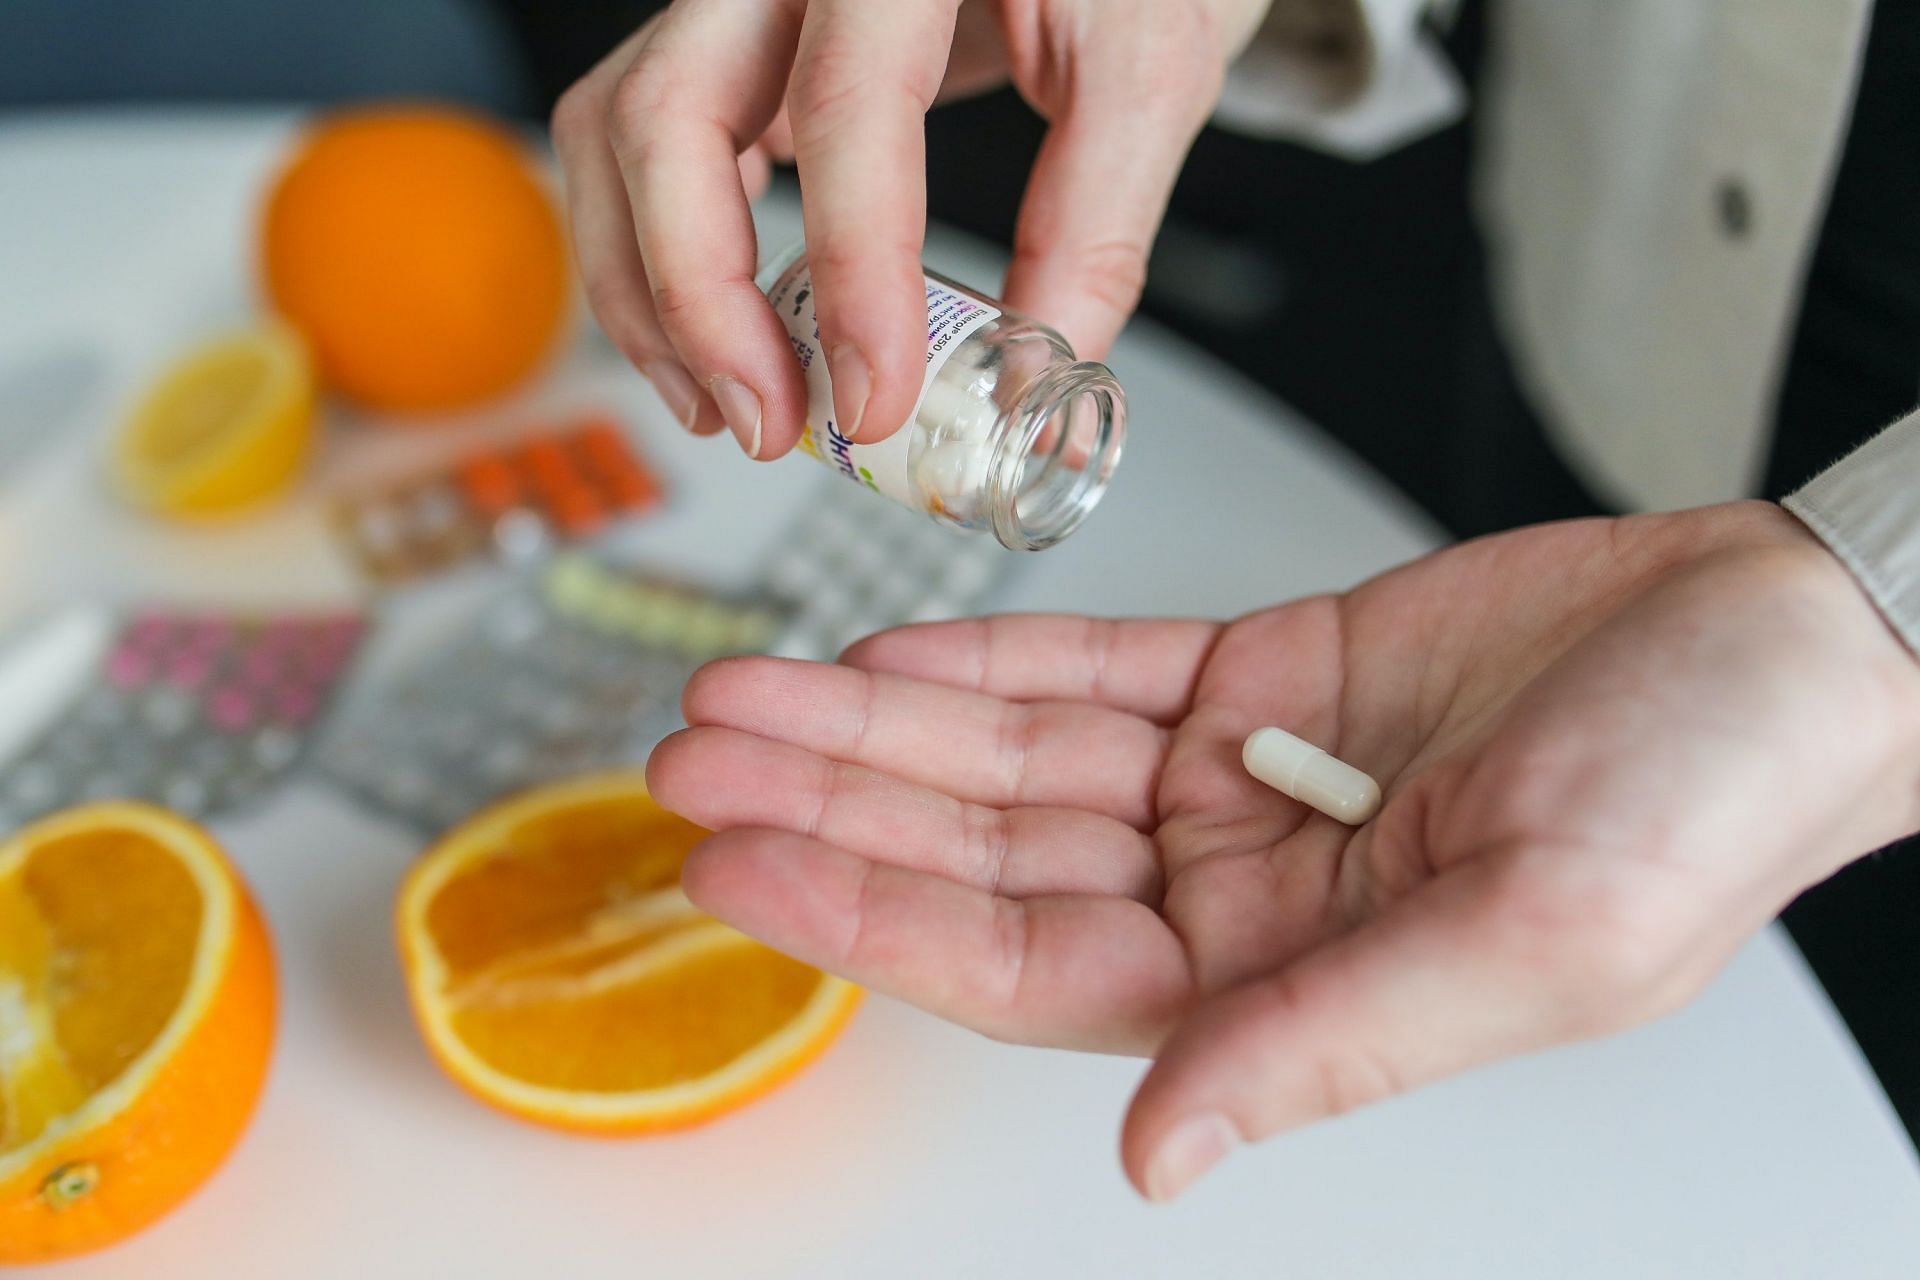 These supplements come in various forms like powder, pills or more. (Image via Pexels/ Polina Tankilevitch)